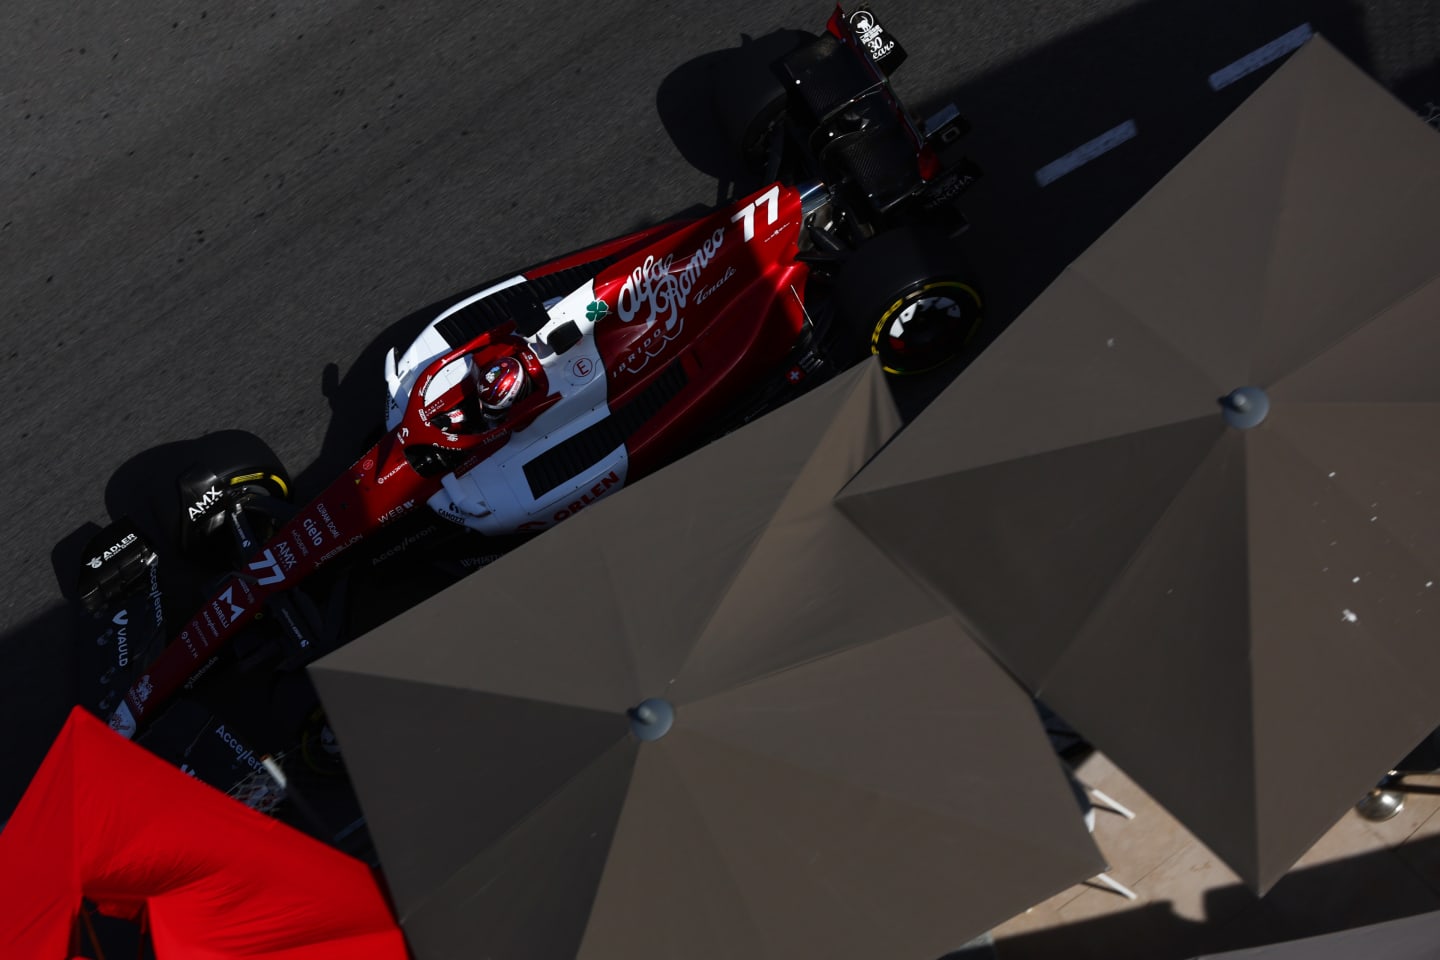 MONTE-CARLO, MONACO - MAY 27: Valtteri Bottas of Finland driving the (77) Alfa Romeo F1 C42 Ferrari on track during practice ahead of the F1 Grand Prix of Monaco at Circuit de Monaco on May 27, 2022 in Monte-Carlo, Monaco. (Photo by Mark Thompson/Getty Images)